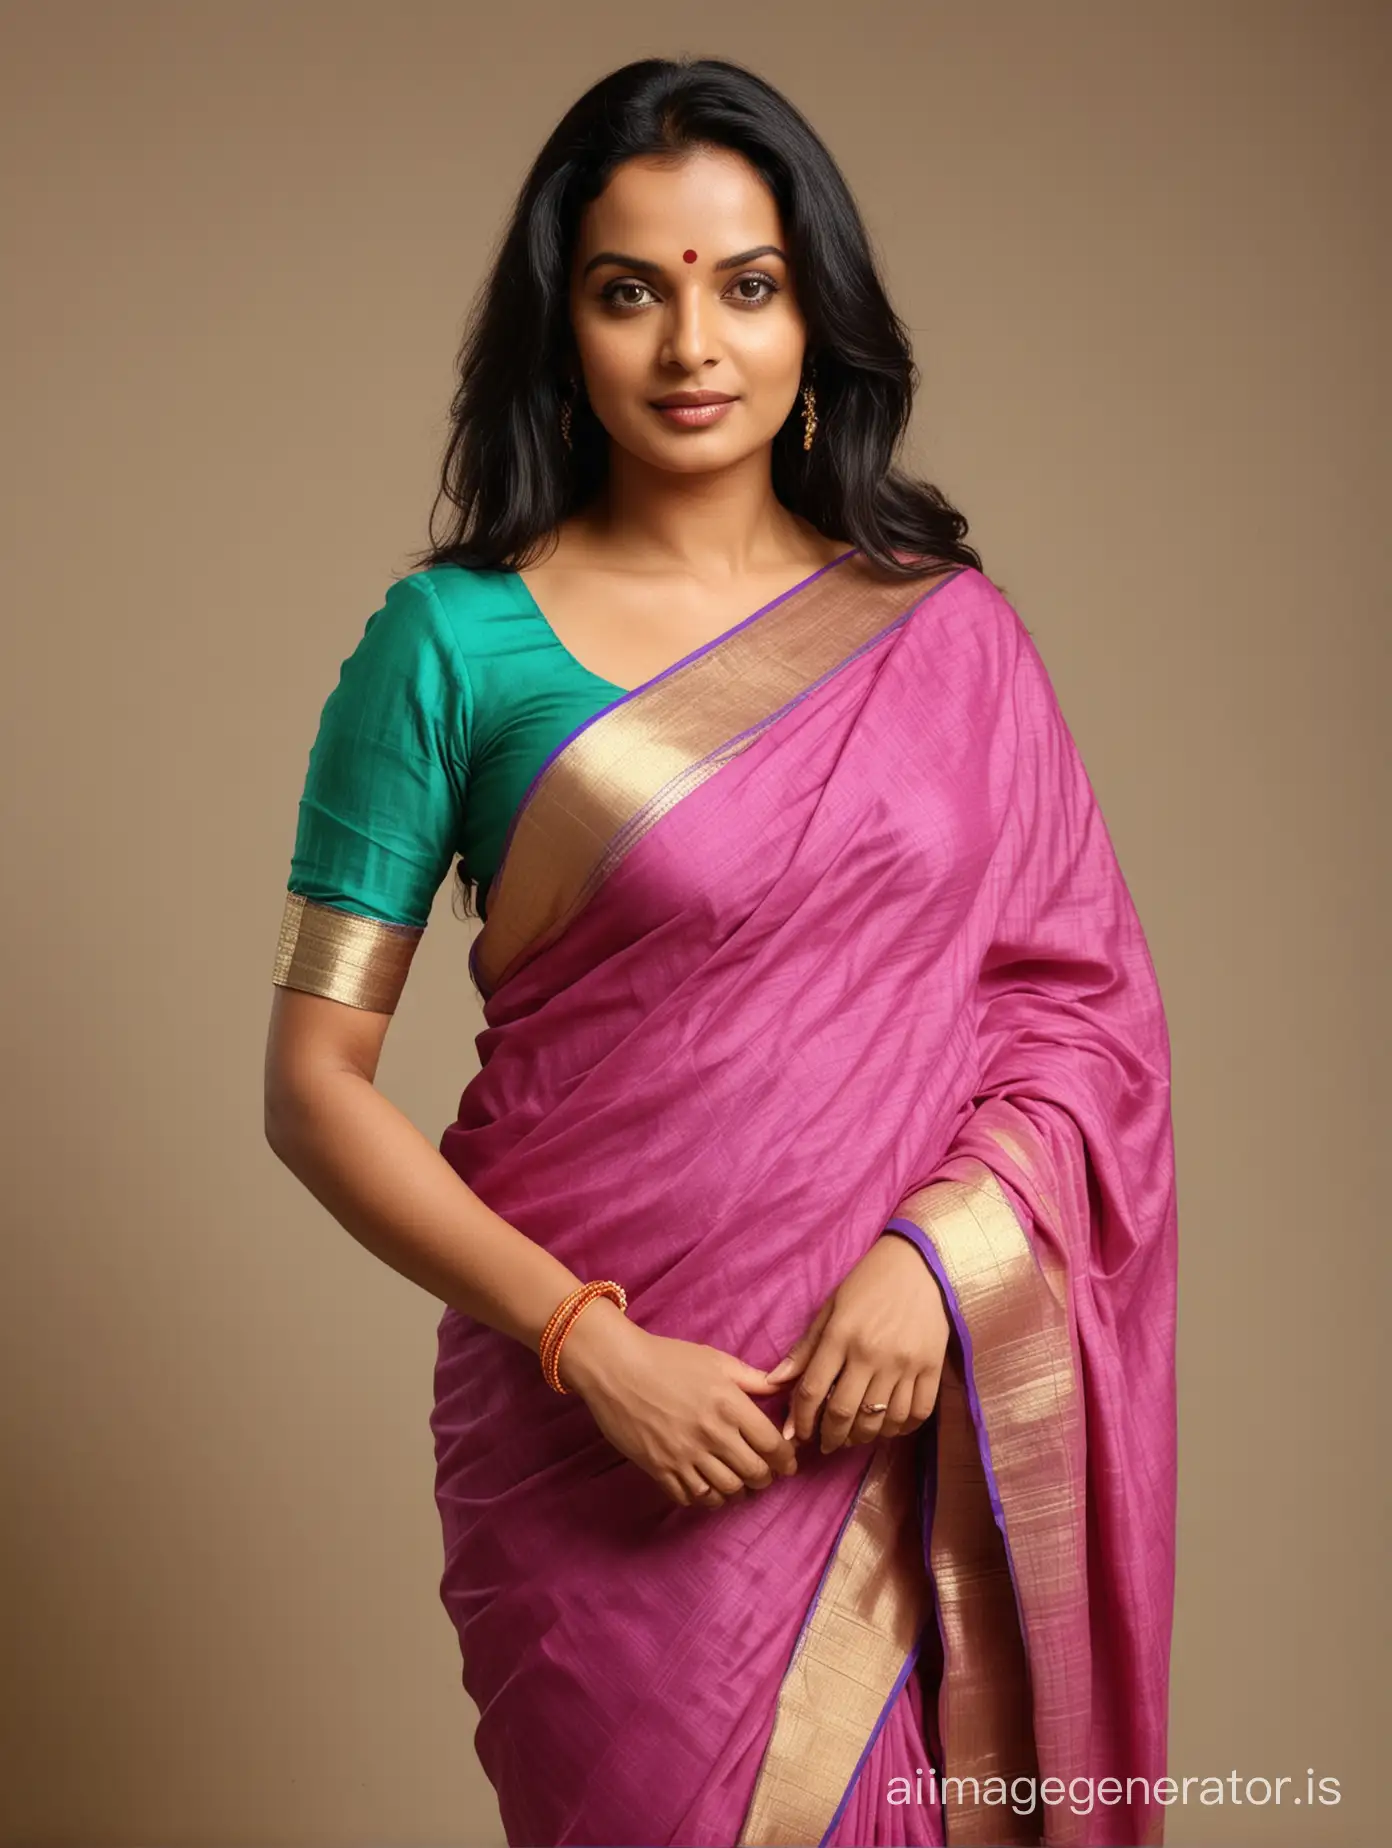 3 DSLR Full body images of 45 year old Kerala woman who looks like Malayalam movie actress Swetha Menon. The woman is wearing a cheap saree like a prostitute. The woman has very long hair.